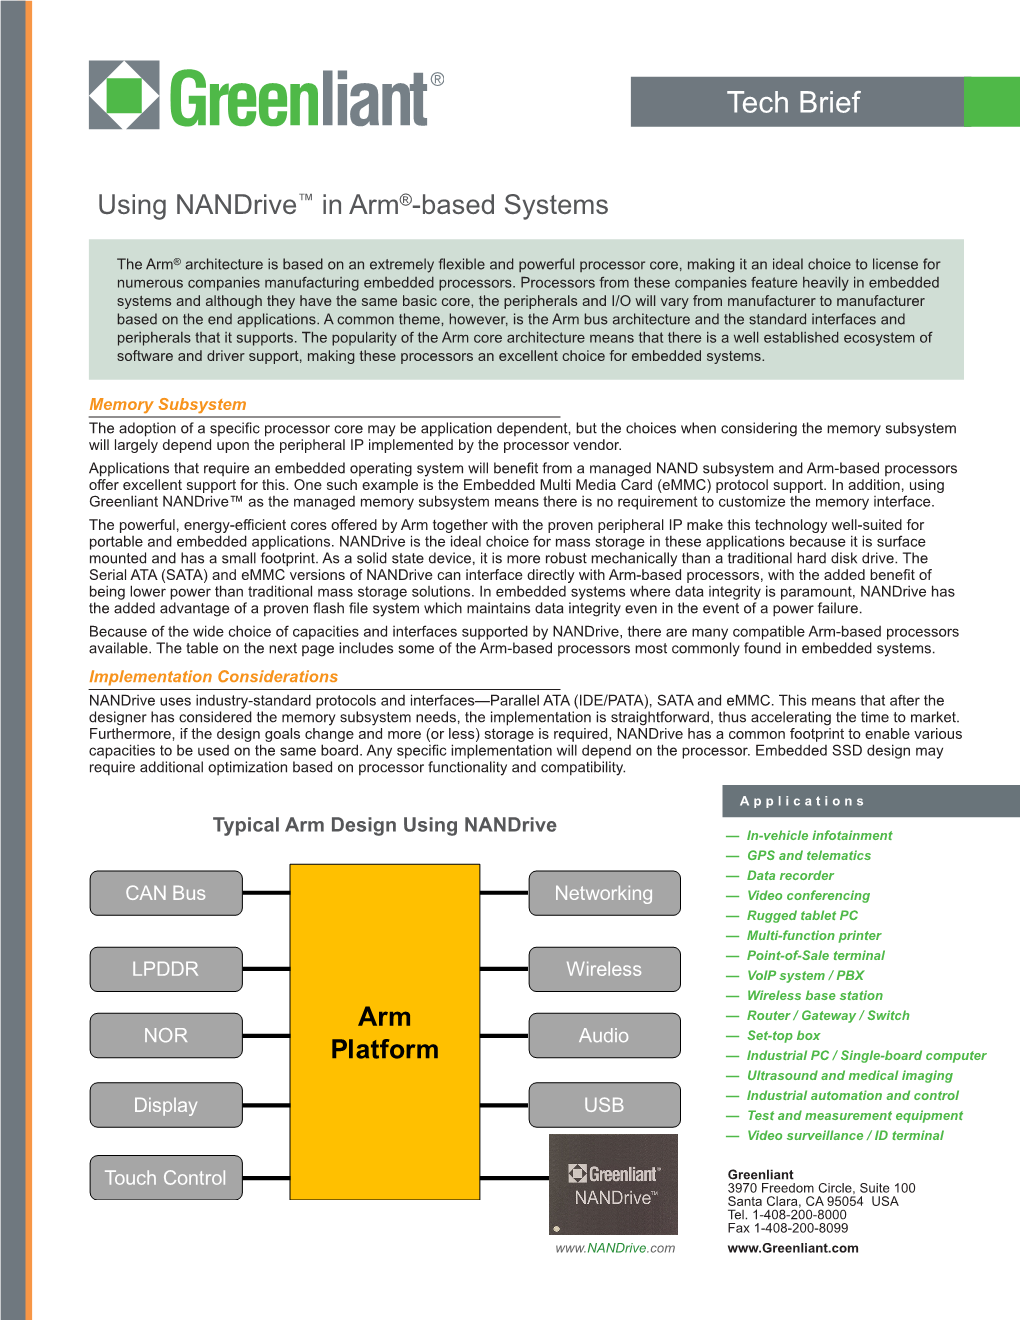 Tech Brief: Using Nandrive in Arm-Based Systems